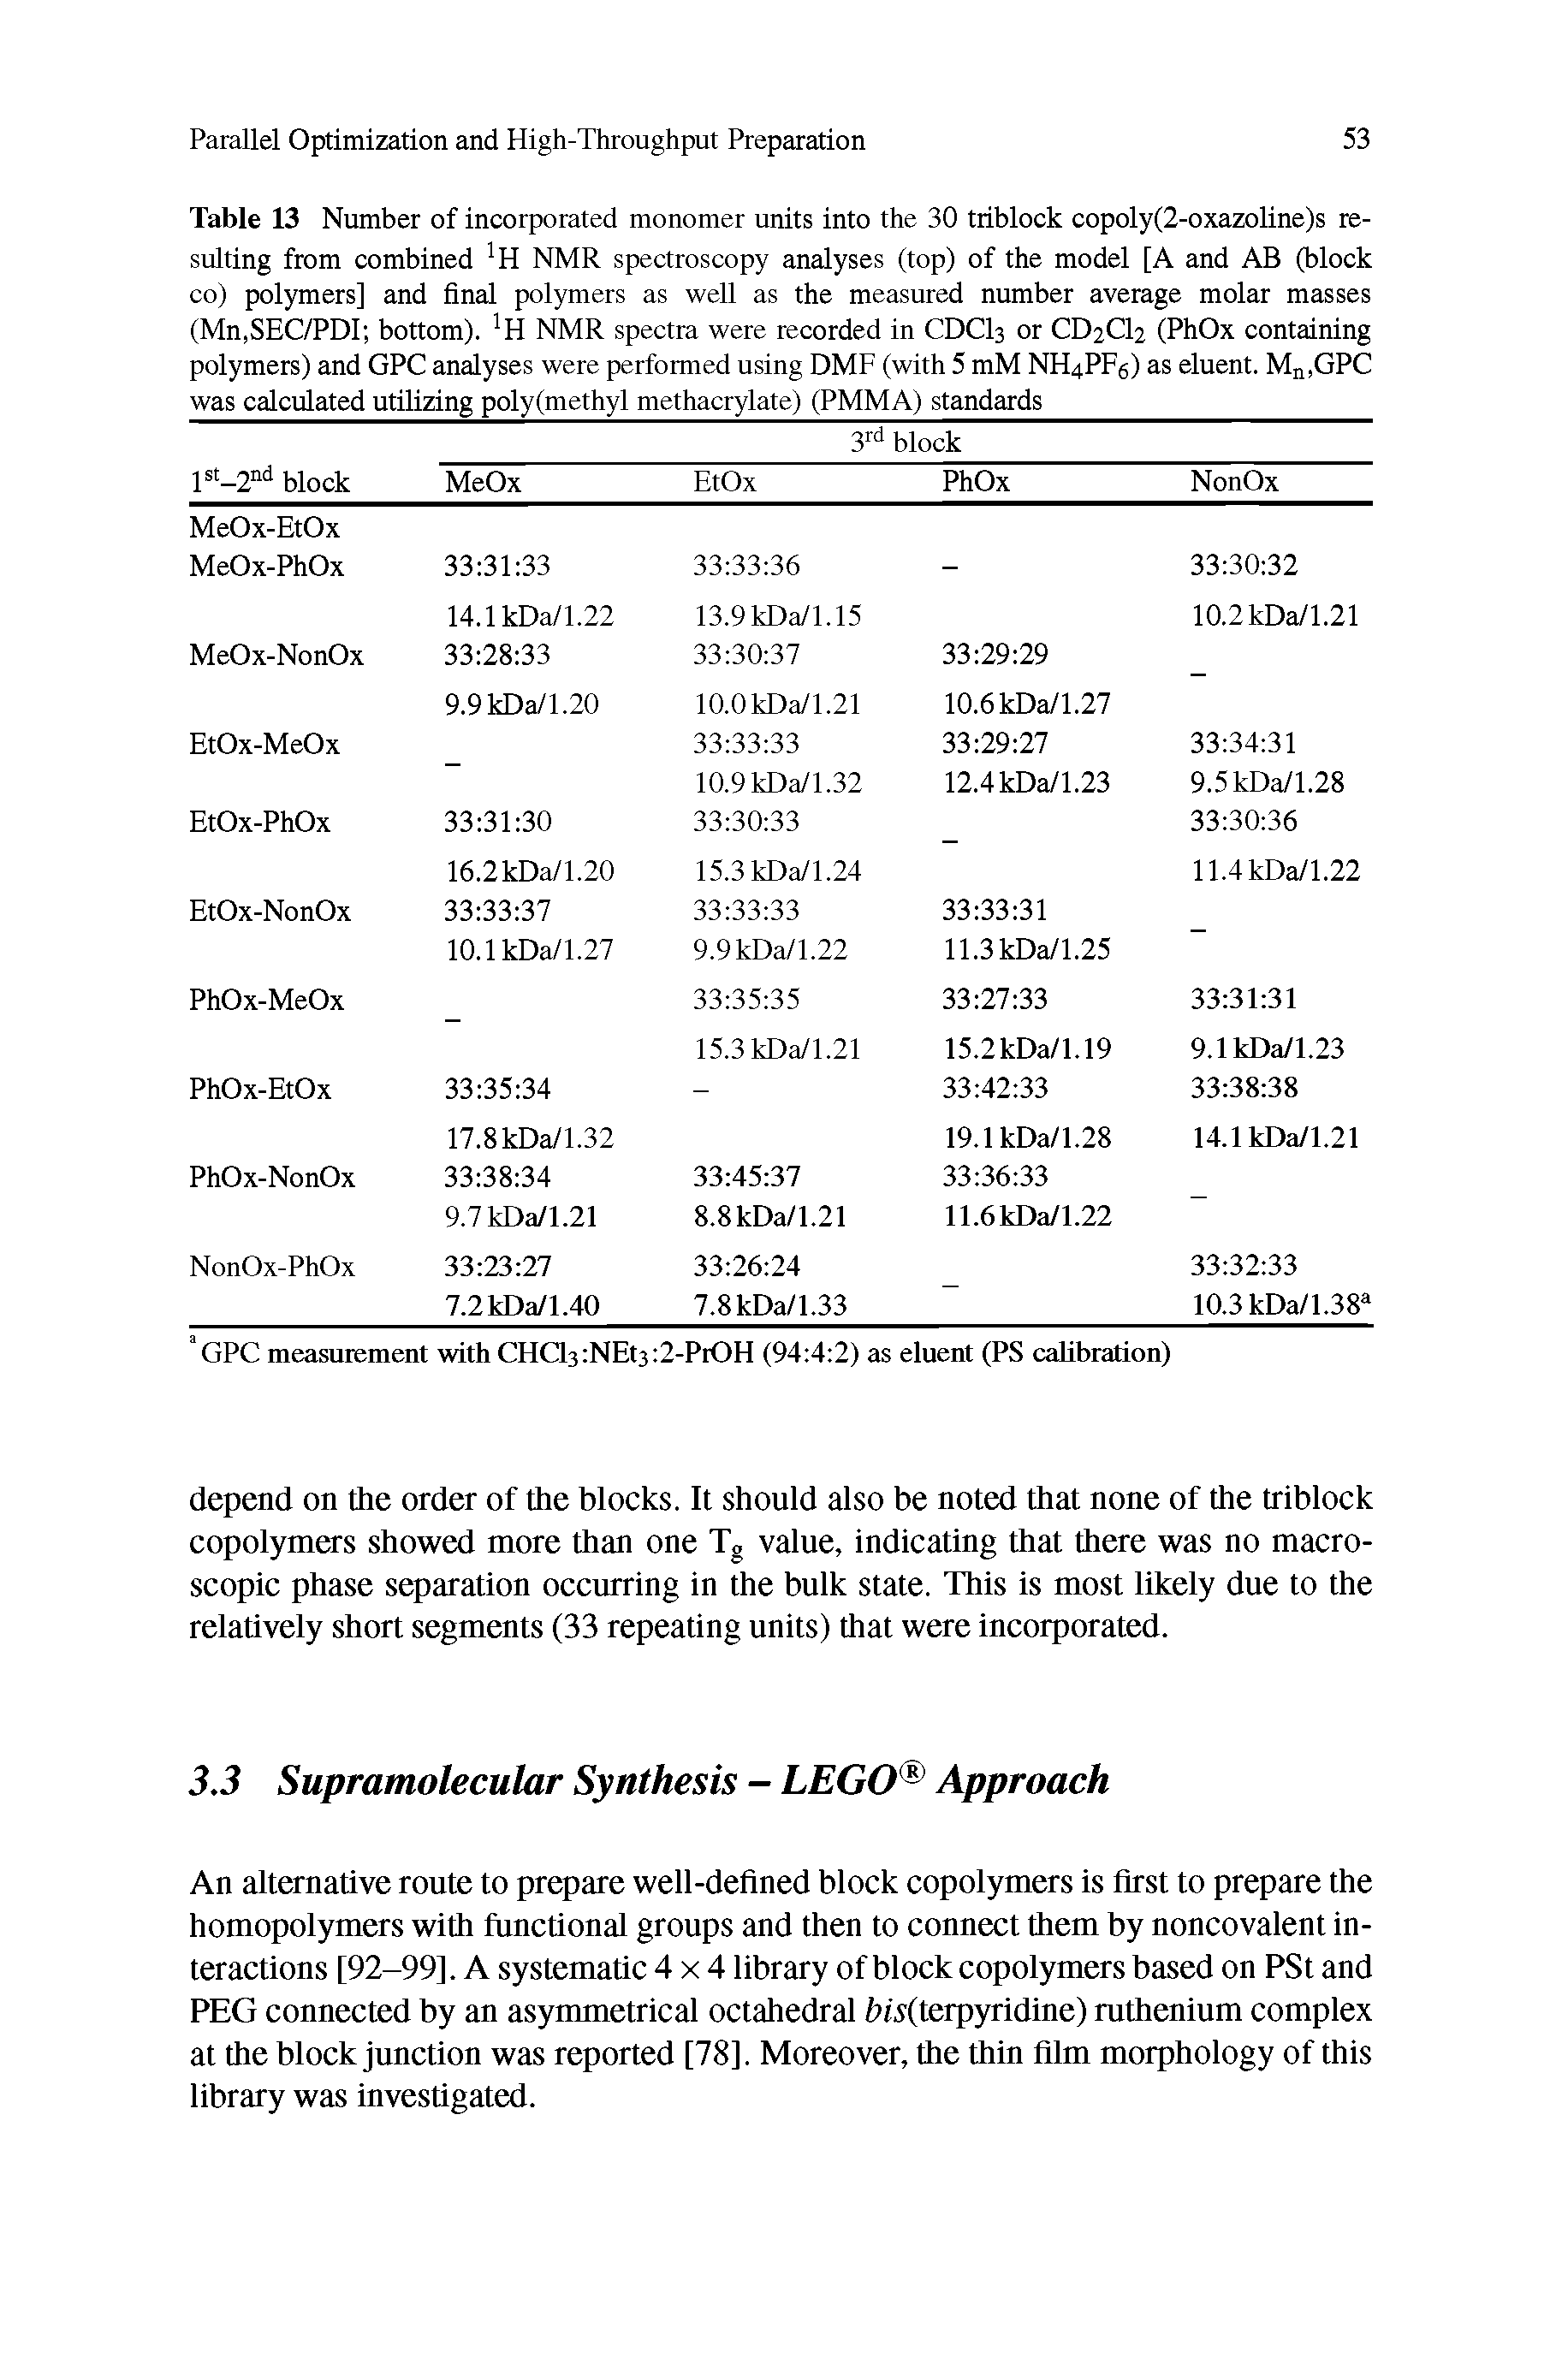 Table 13 Number of incorporated monomer units into the 30 triblock copoly(2-oxazoline)s resulting from combined H NMR spectroscopy analyses (top) of the model [A and AB (block co) polymers] and final polymers as well as the measured number average molar masses (Mn,SEC/PDI bottom). H NMR spectra were recorded in CDCI3 or CD2CI2 (PhOx containing polymers) and GPC analyses were performed using DMF (with 5 mM NH4PF6) as eluent. Mn,GPC was calculated utilizing poly(methyl methacrylate) (PMMA) standards...